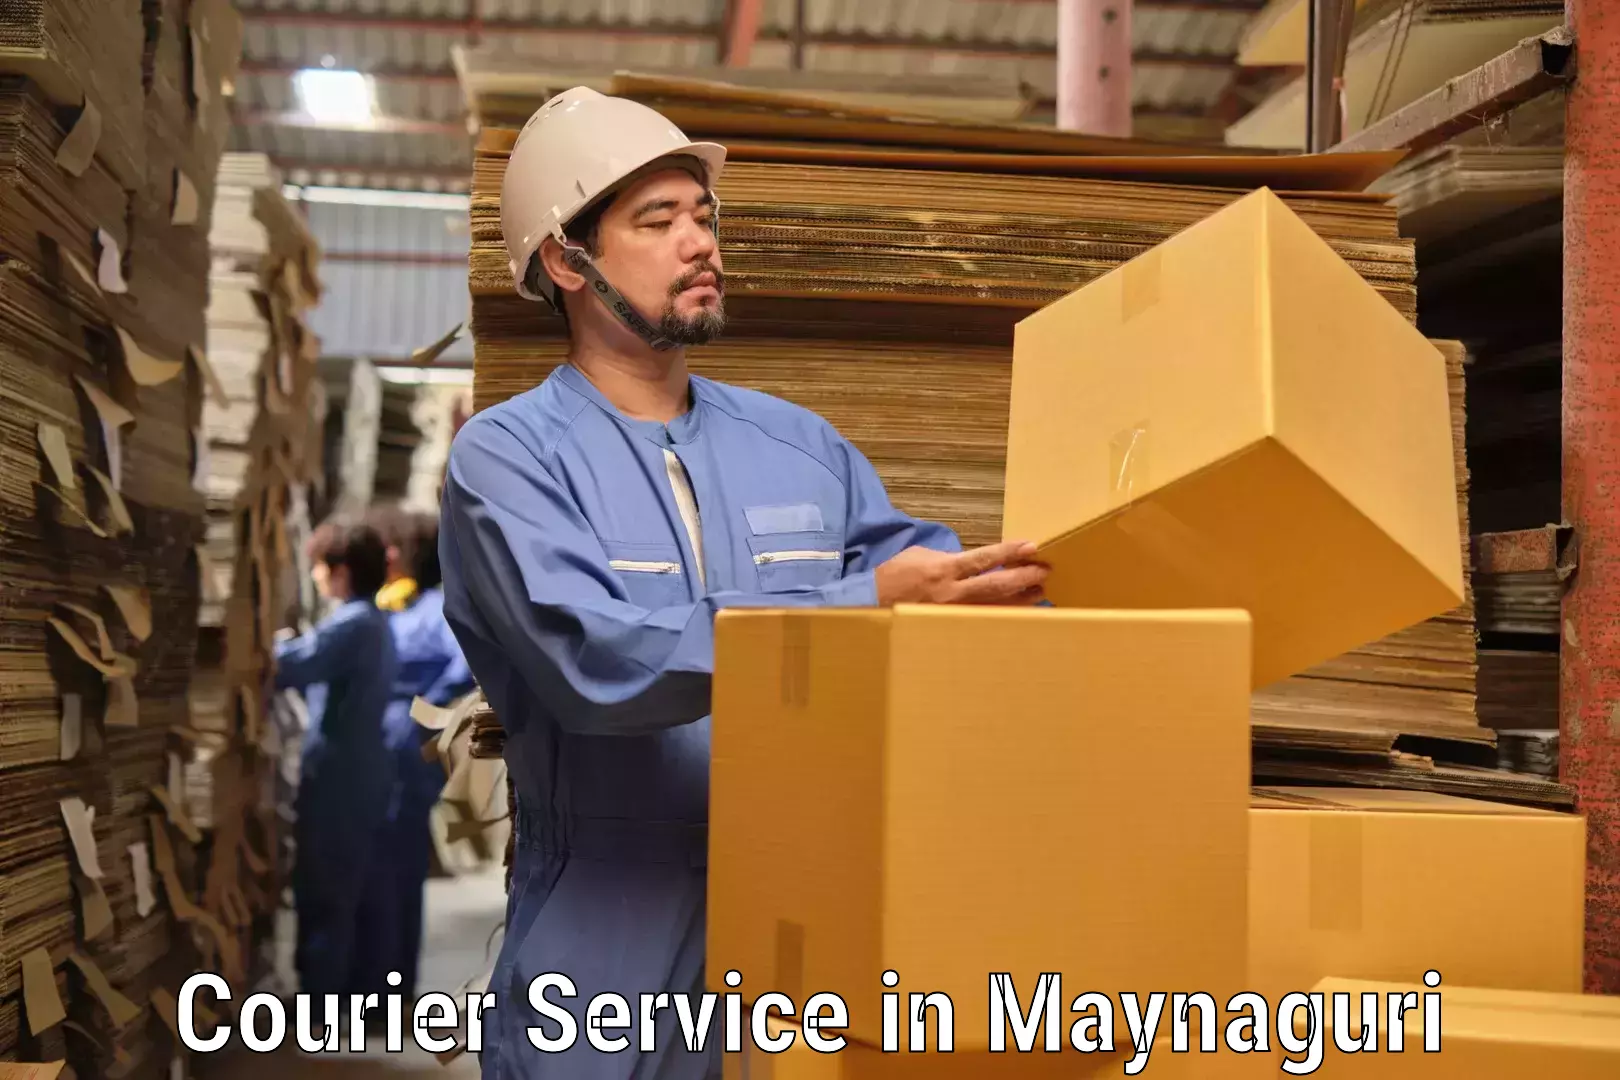 Modern delivery technologies in Maynaguri